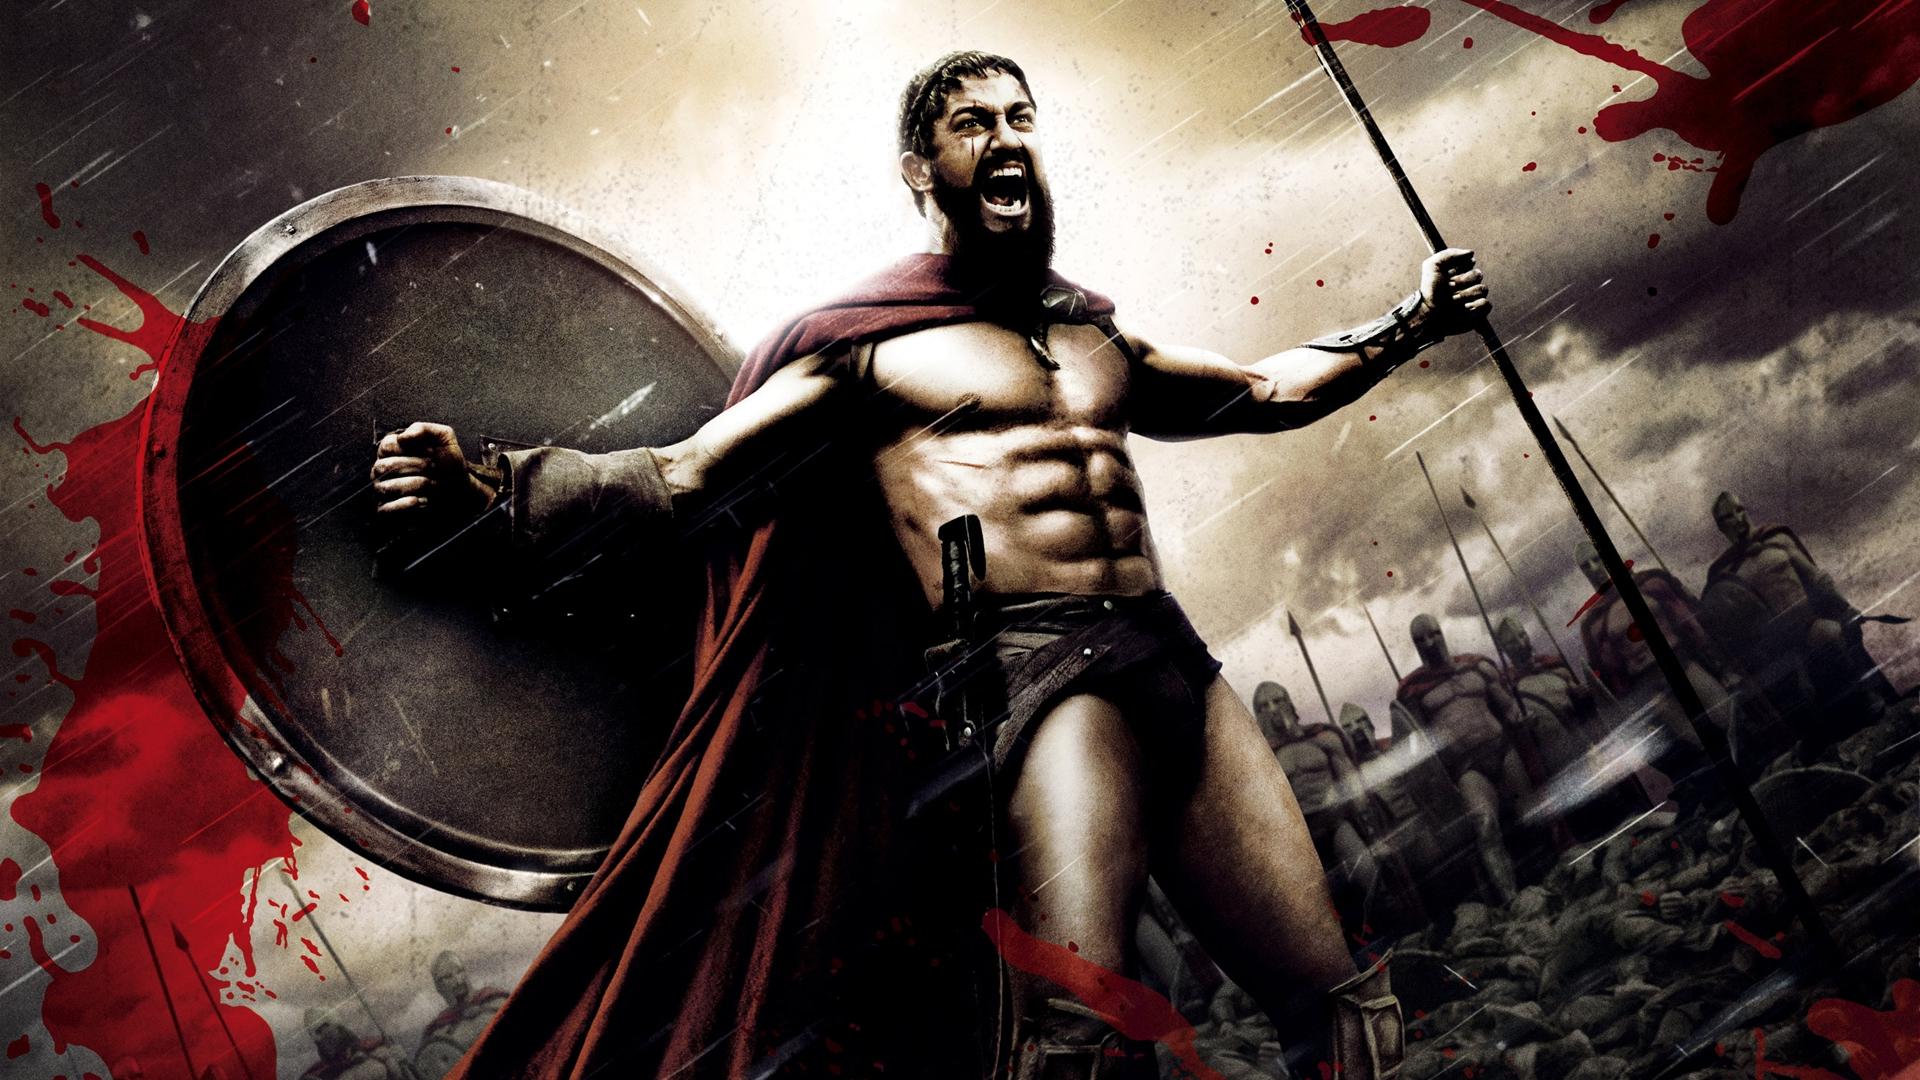 The true story of 300: how much of the Gerard Butler movie is real?